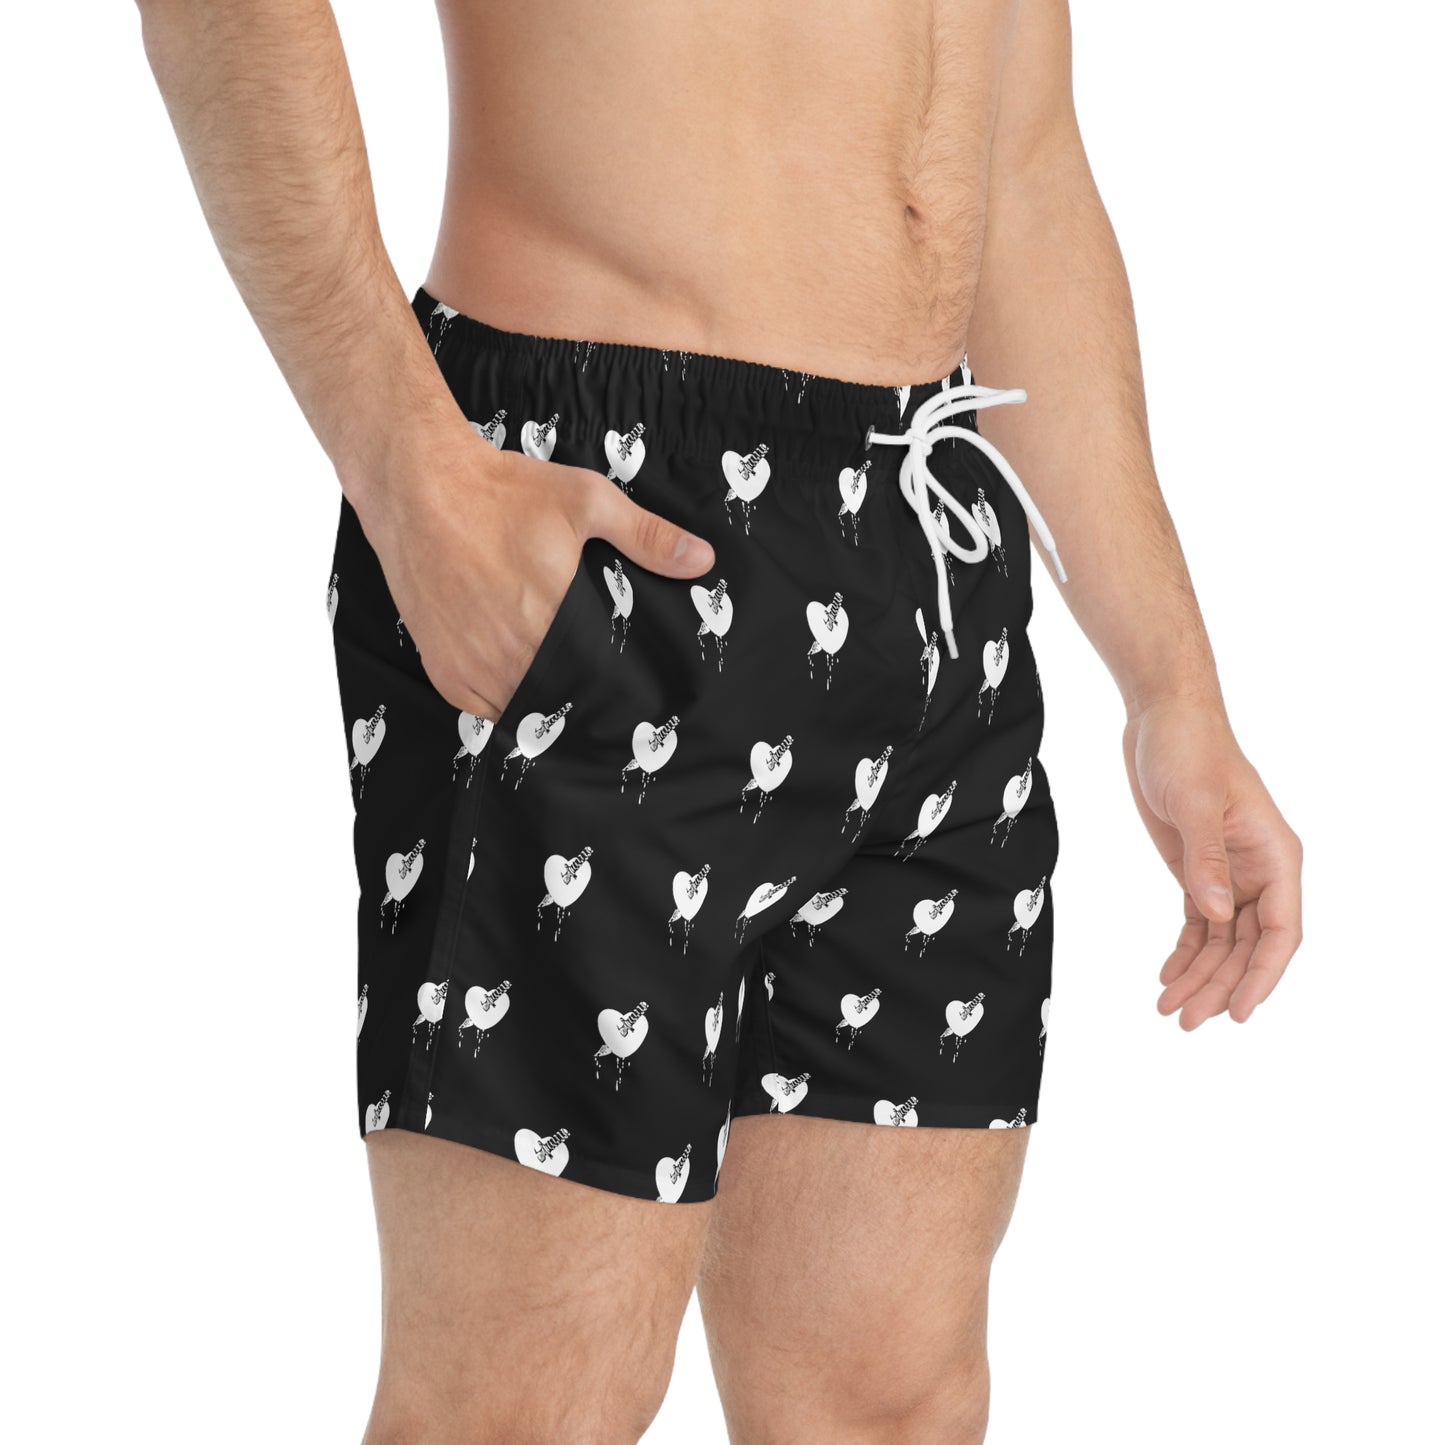 As if you love me Swim Trunks